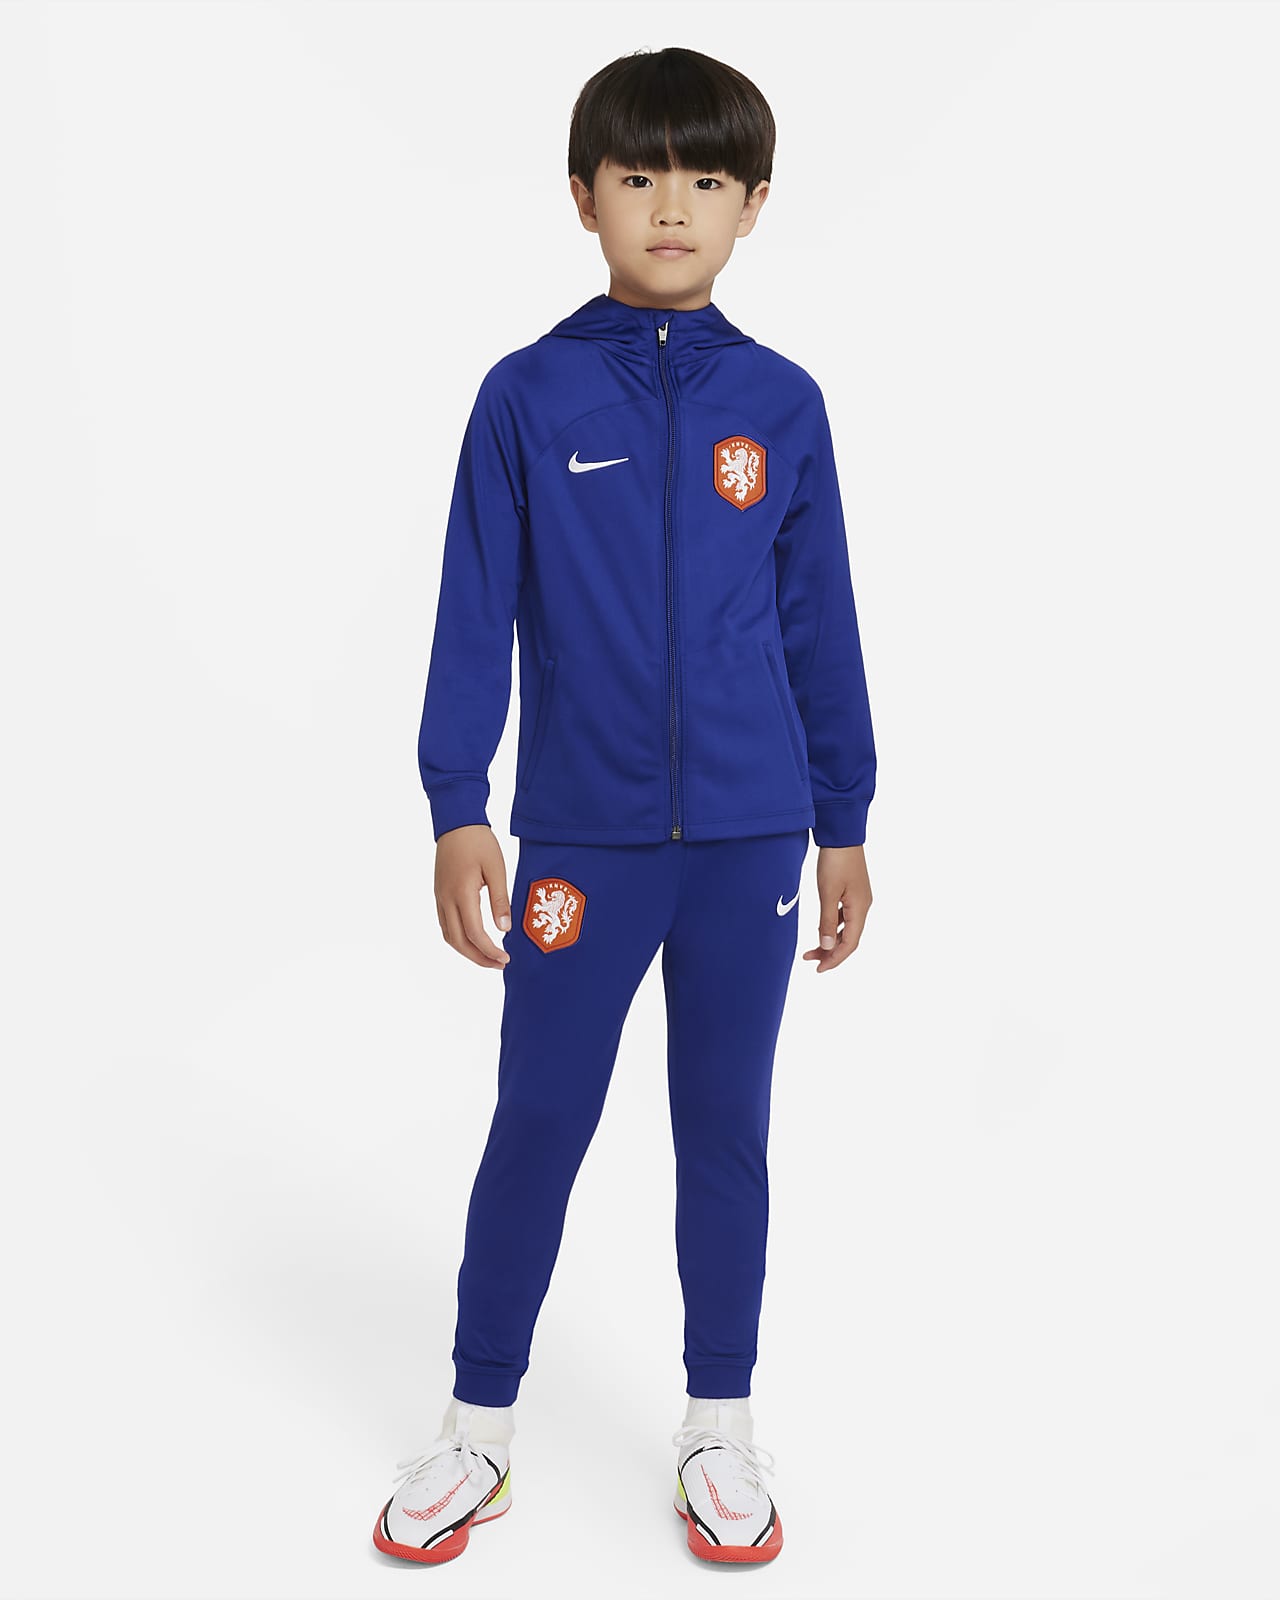 Netherlands Strike Younger Kids' Nike Dri-FIT Hooded Football Tracksuit ...